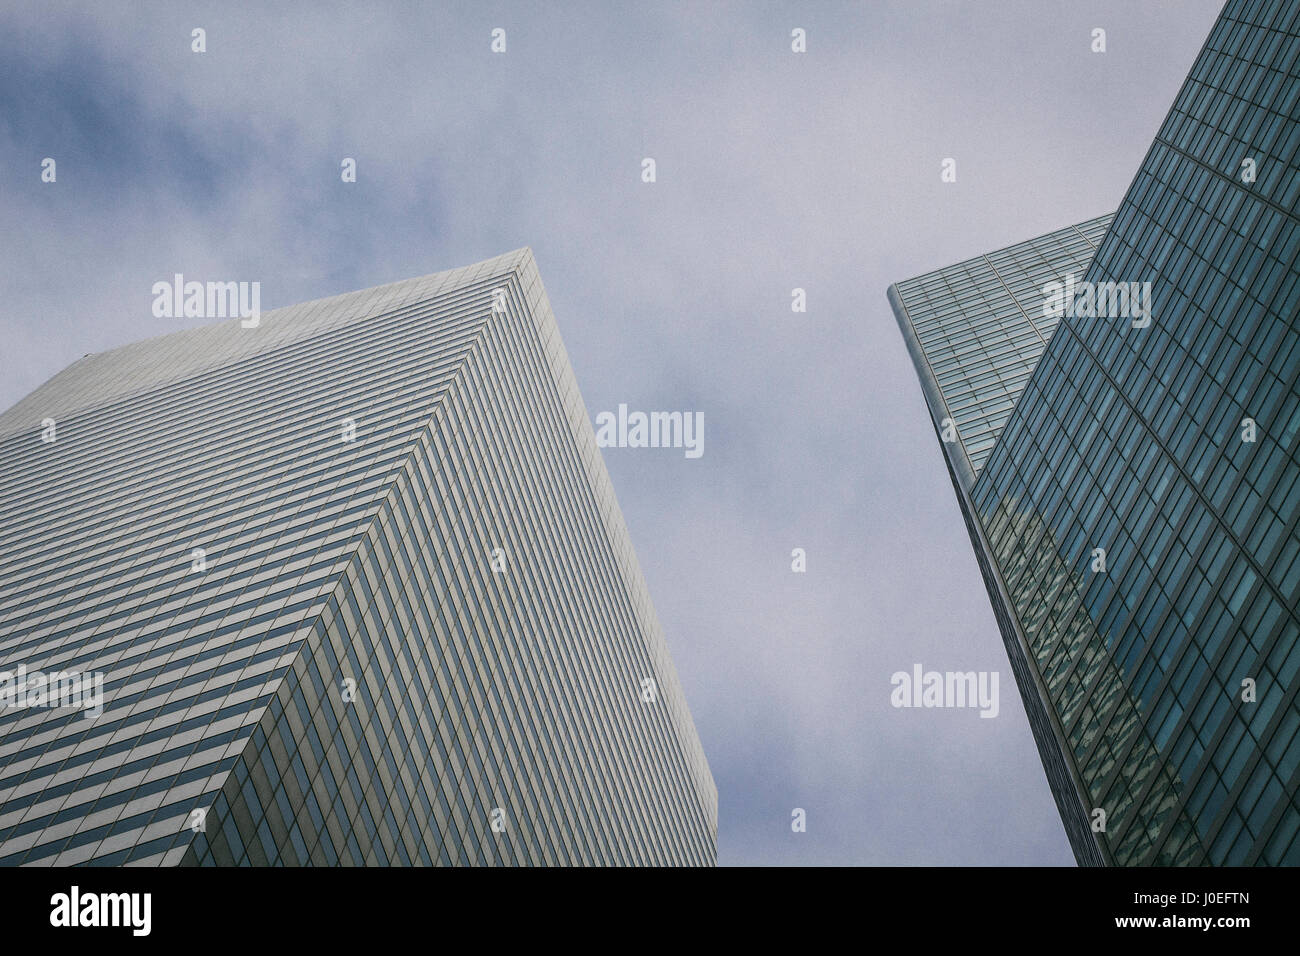 Tall Building in New York, United States of America. Stock Photo